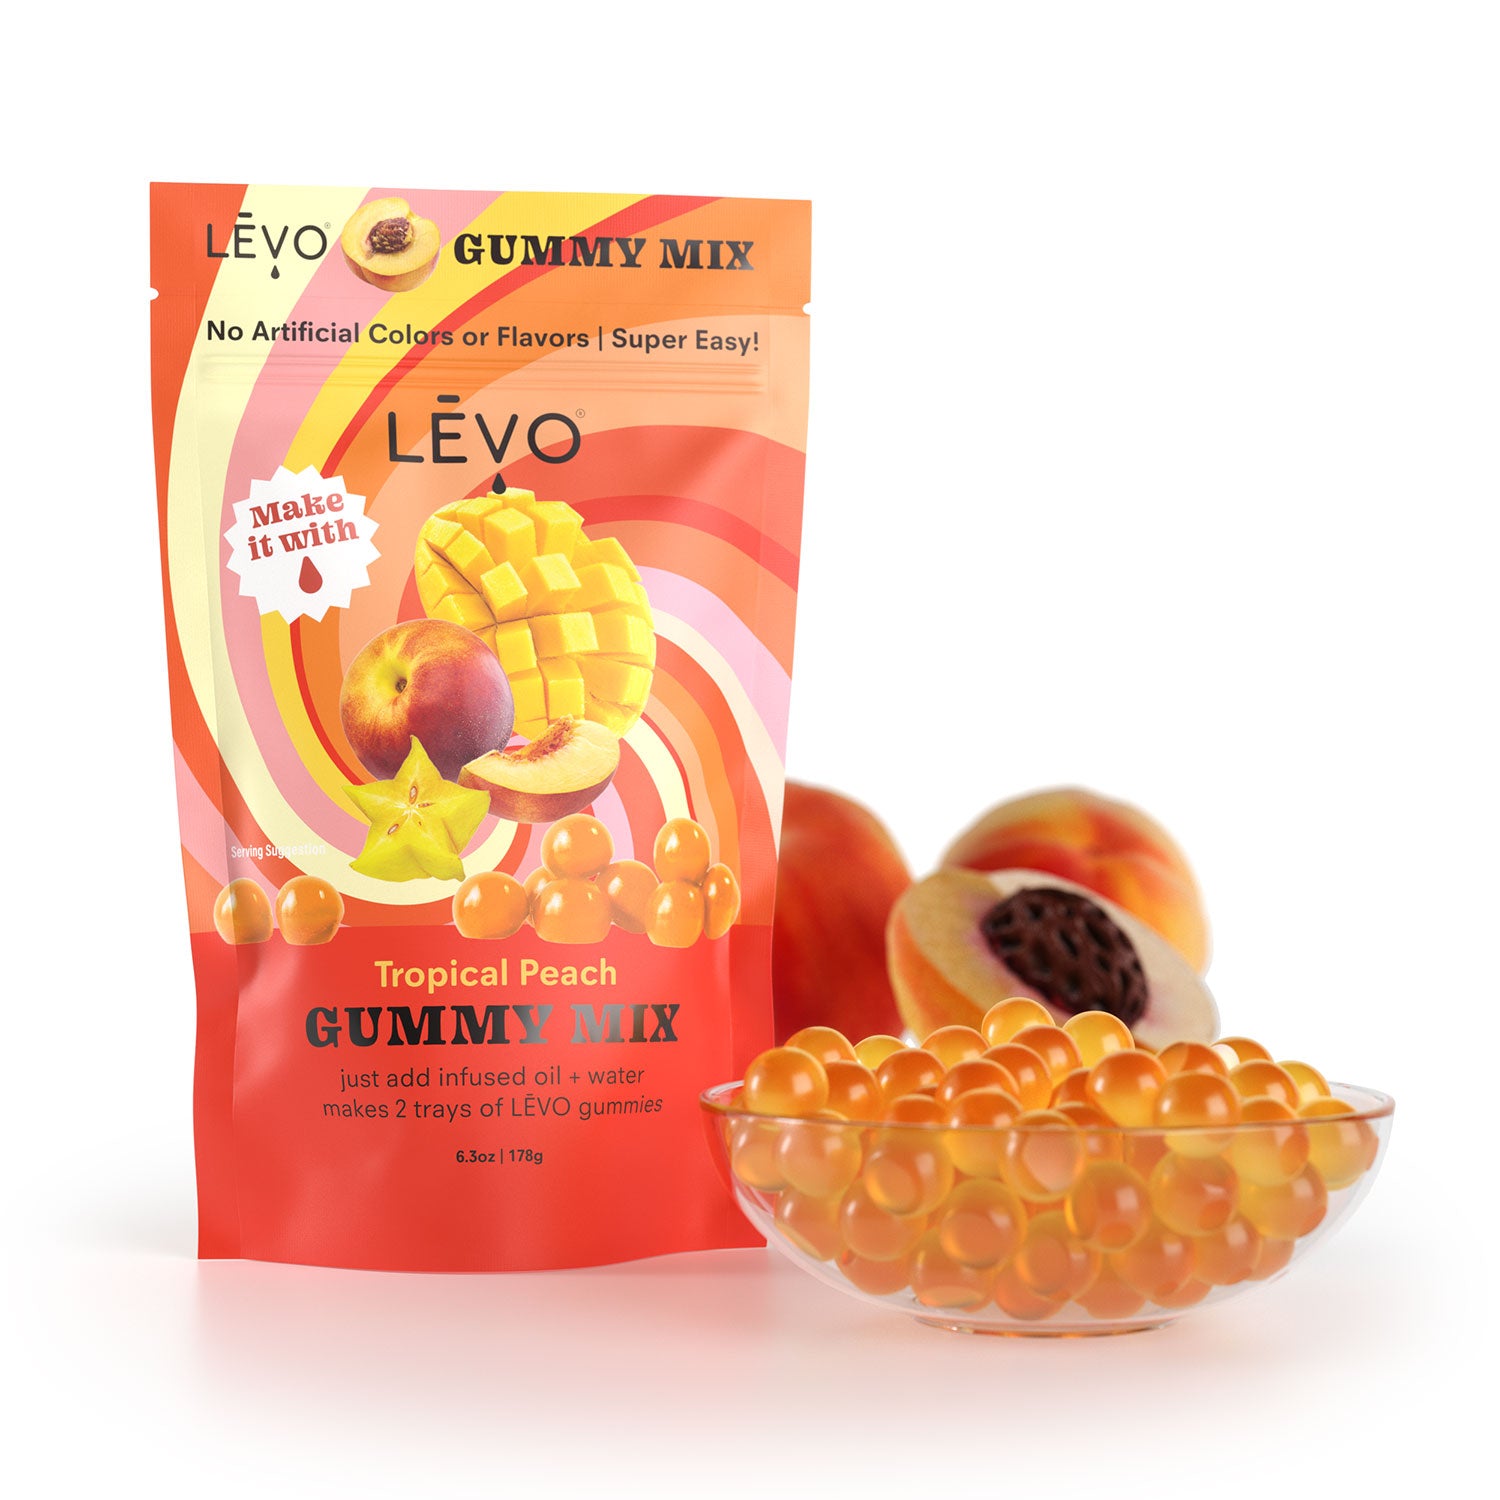 Treat your tasetbuds to Tropical Peach gummies, with hints of mango, starfruit, and pineapple. Make your own peachy oasis at home with LEVO powdered gummy mix. Just add infused oil and water to cook up your own batch of infused gummies.